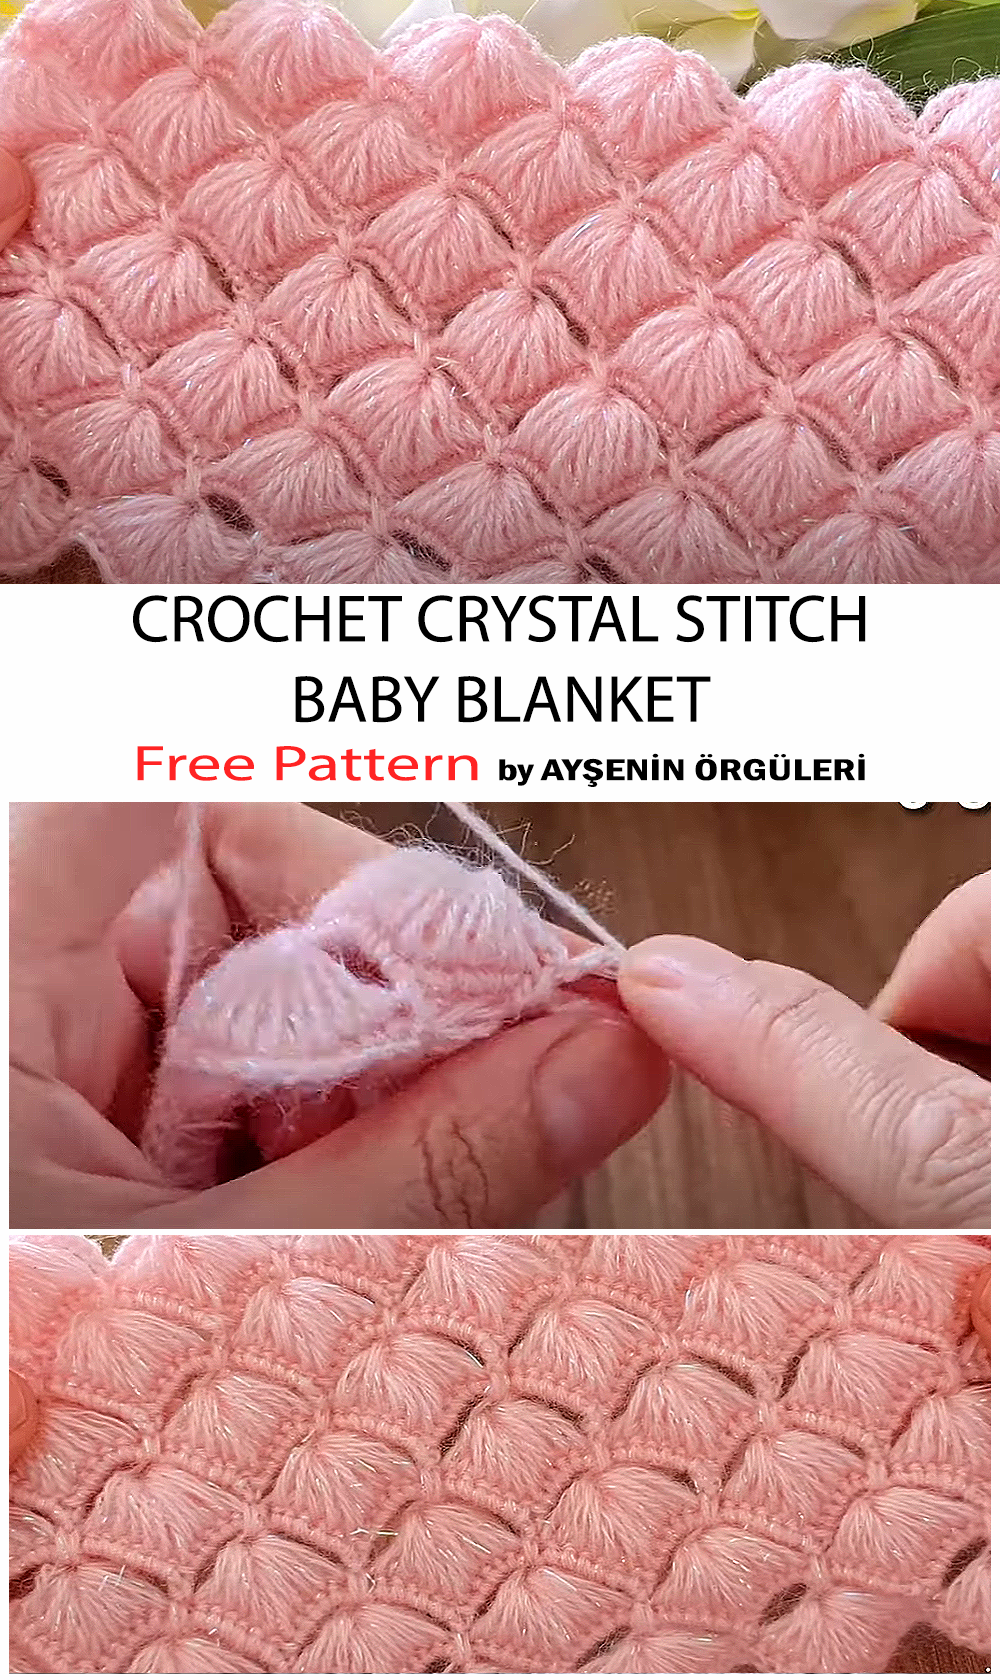 How To Crochet Crystal Stitch Baby Blanket - Free Pattern For Beginners